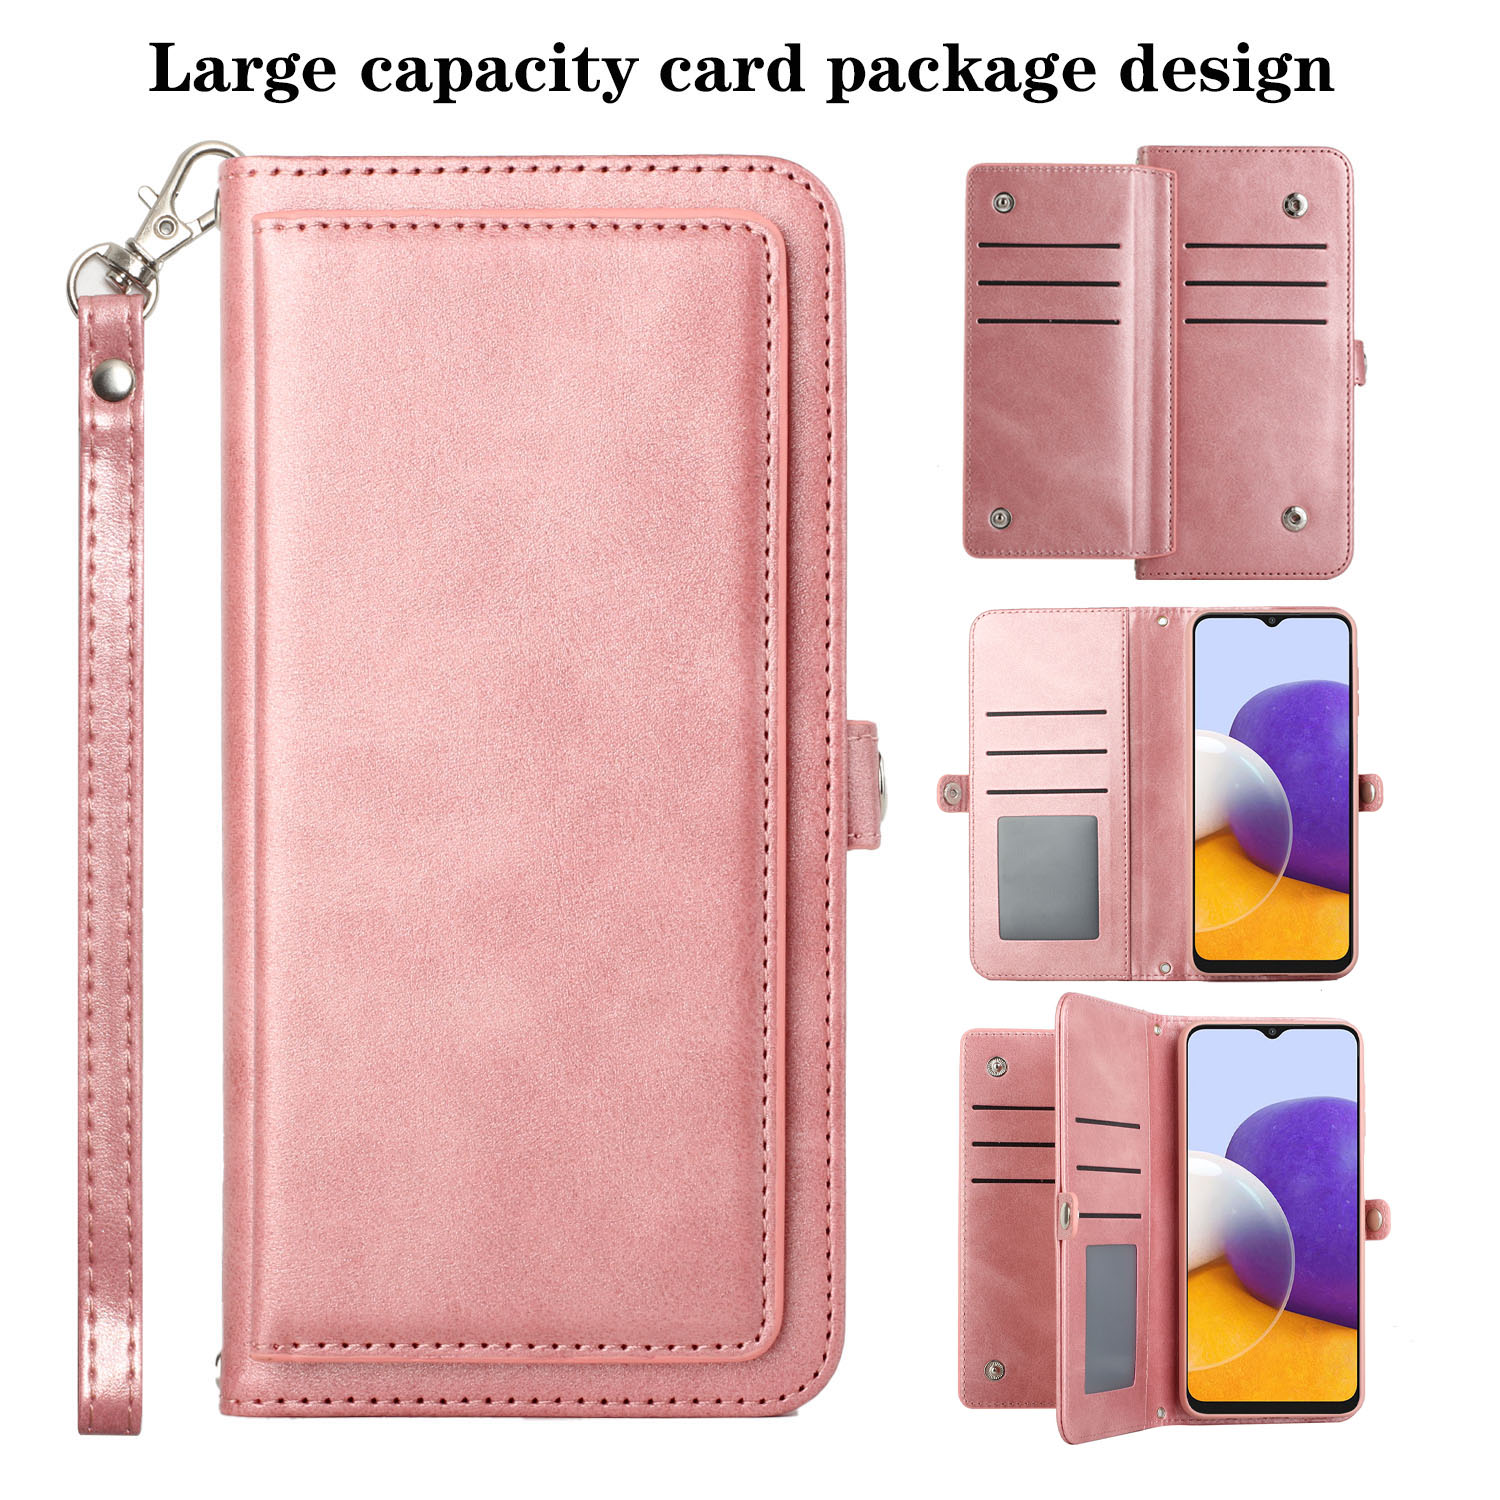 Premium PU Leather Folio WALLET Front Cover Case for Galaxy A22 5G (Rose Gold)